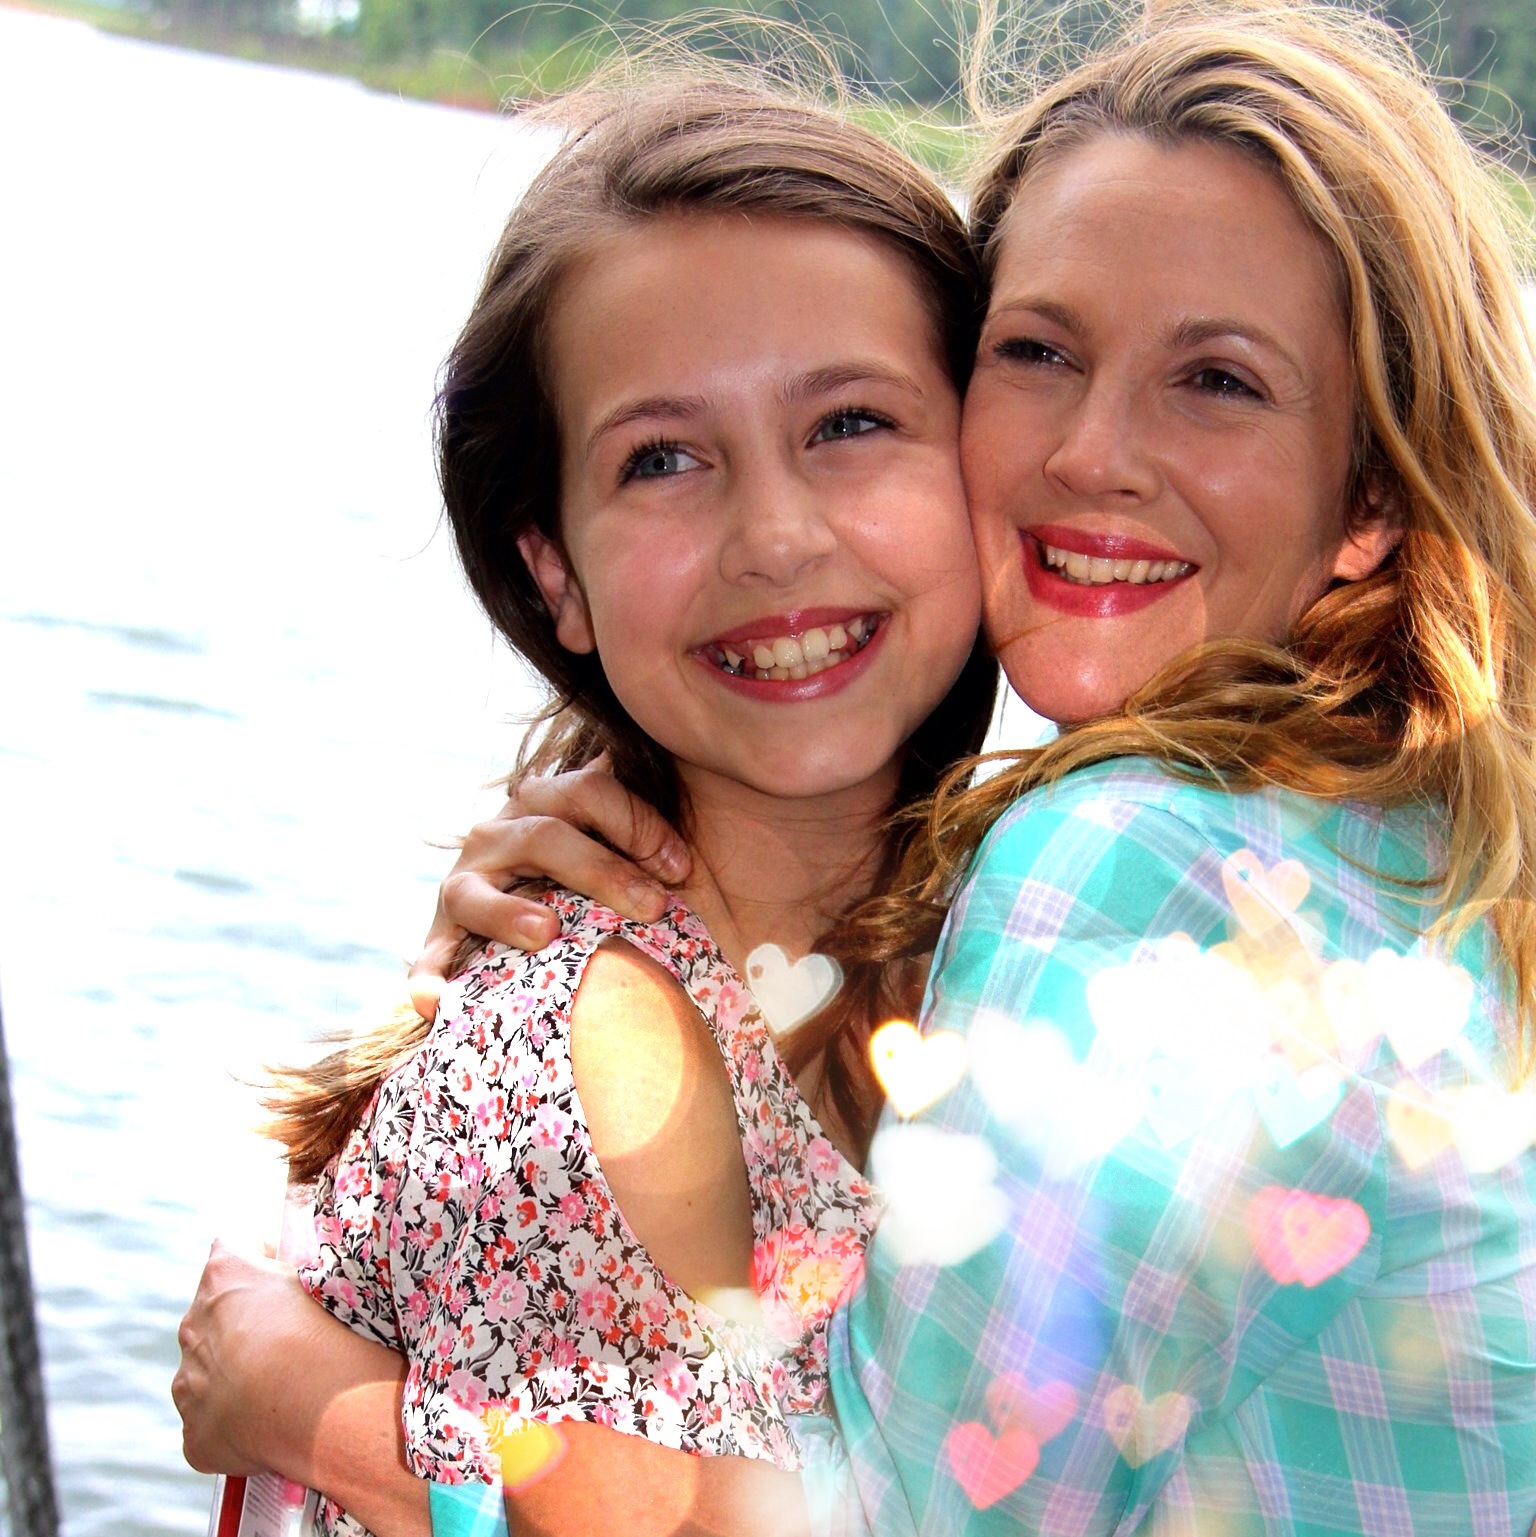 Emma Fuhrmann and Drew Barrymore on the set of BLENDED 2013